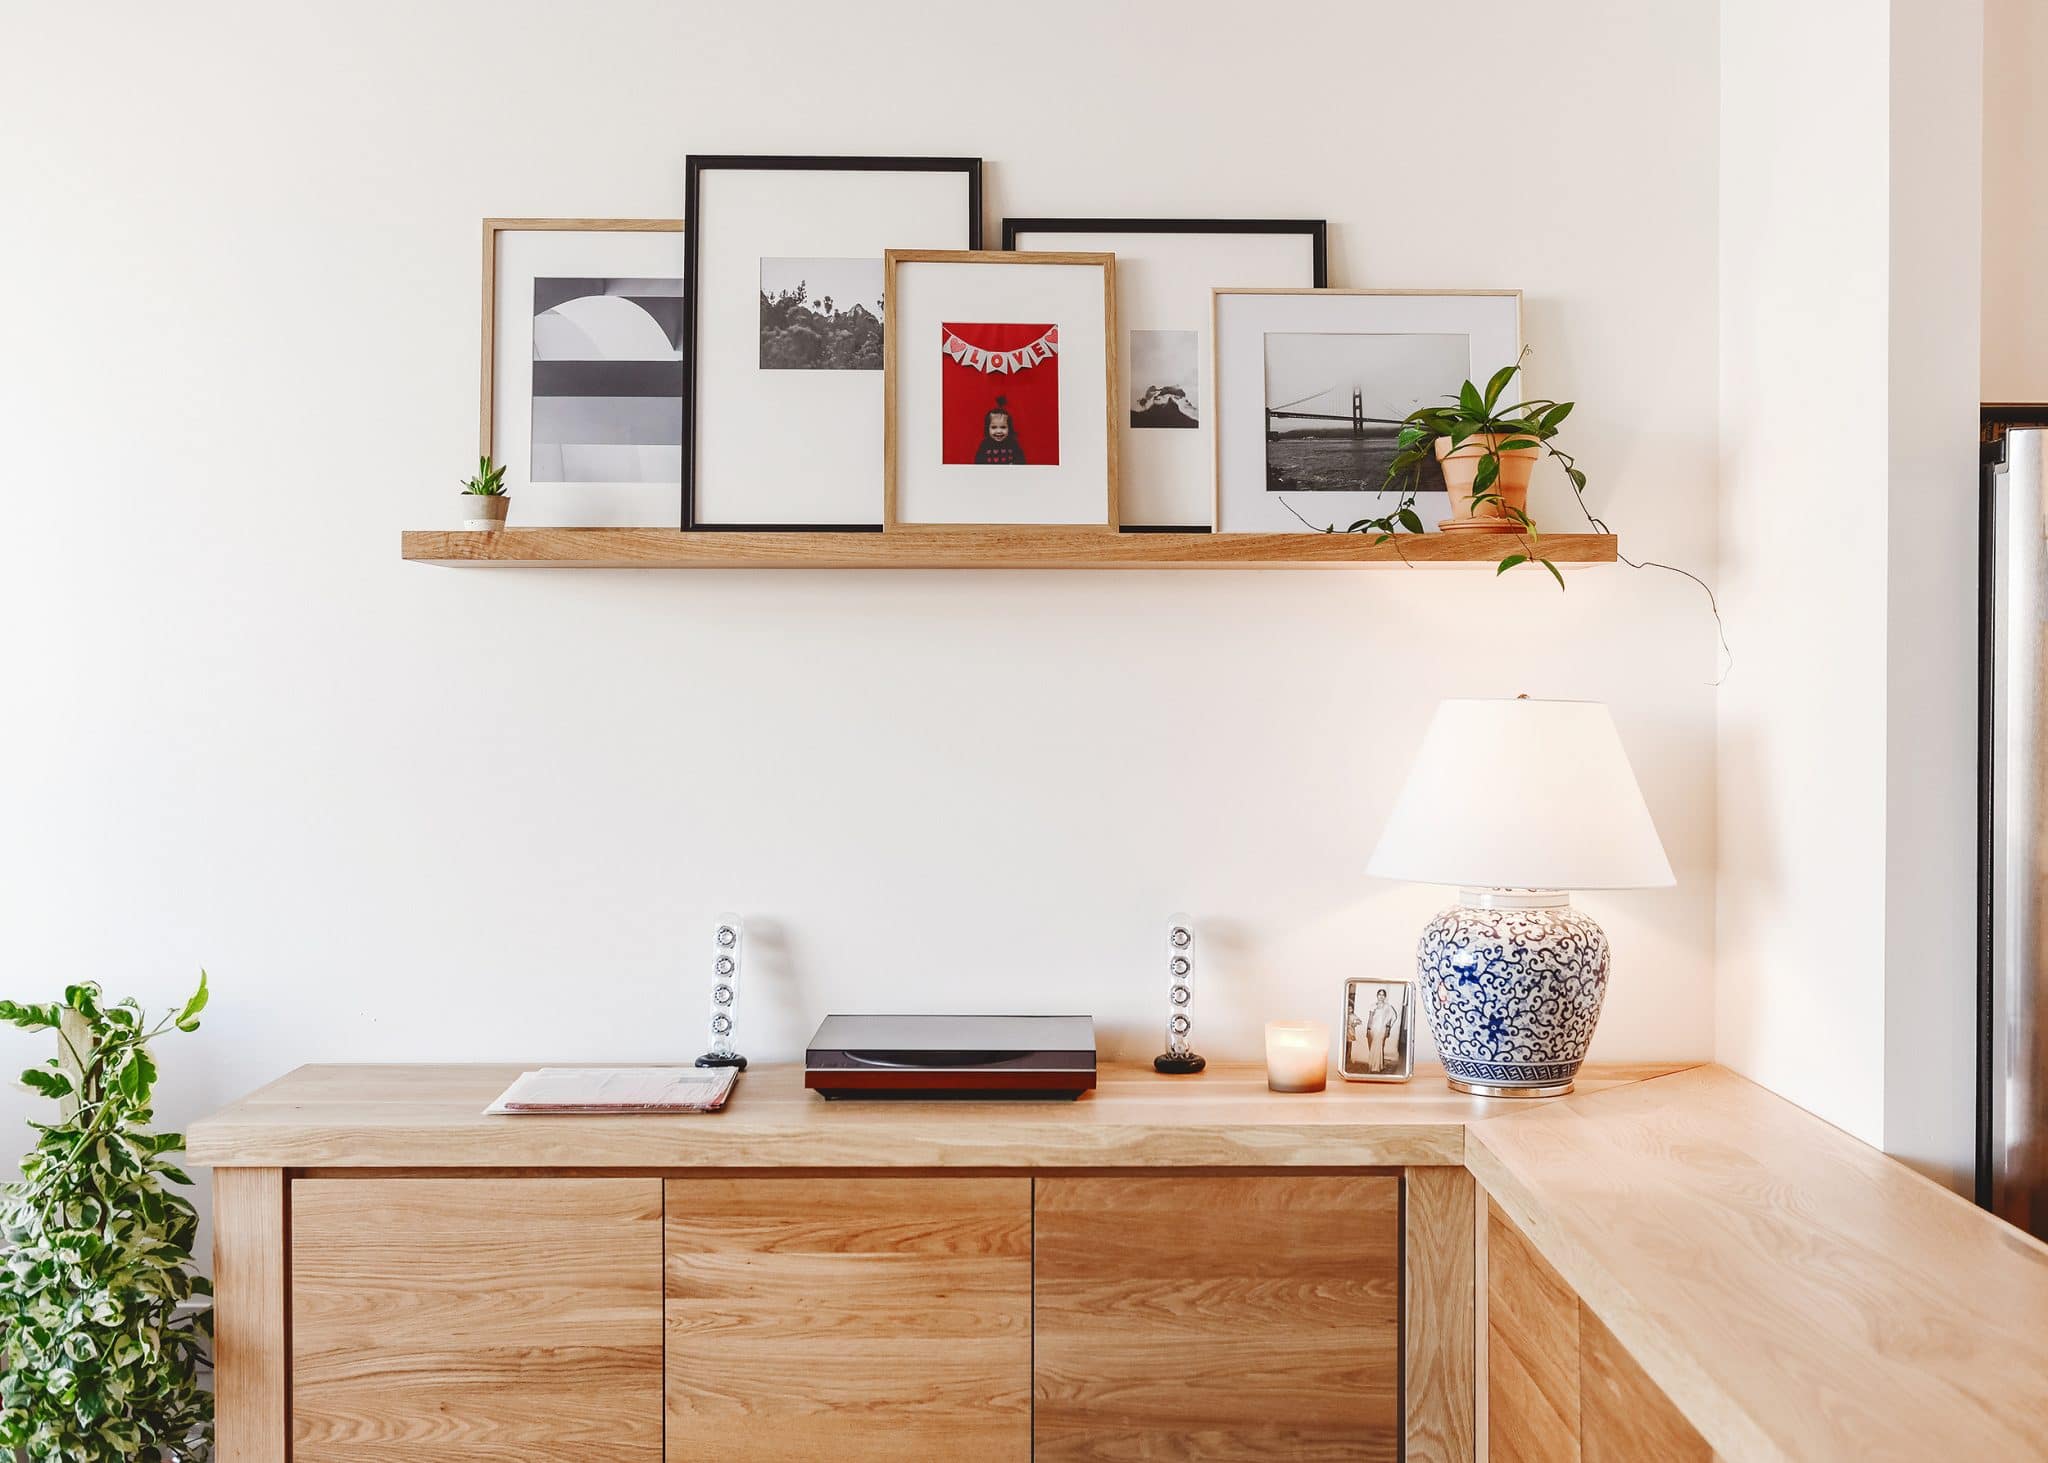 L-shaped sideboard with floating shelf above, white oak and neutral colors | play nook inspiration in an open concept home | via Yellow Brick Home